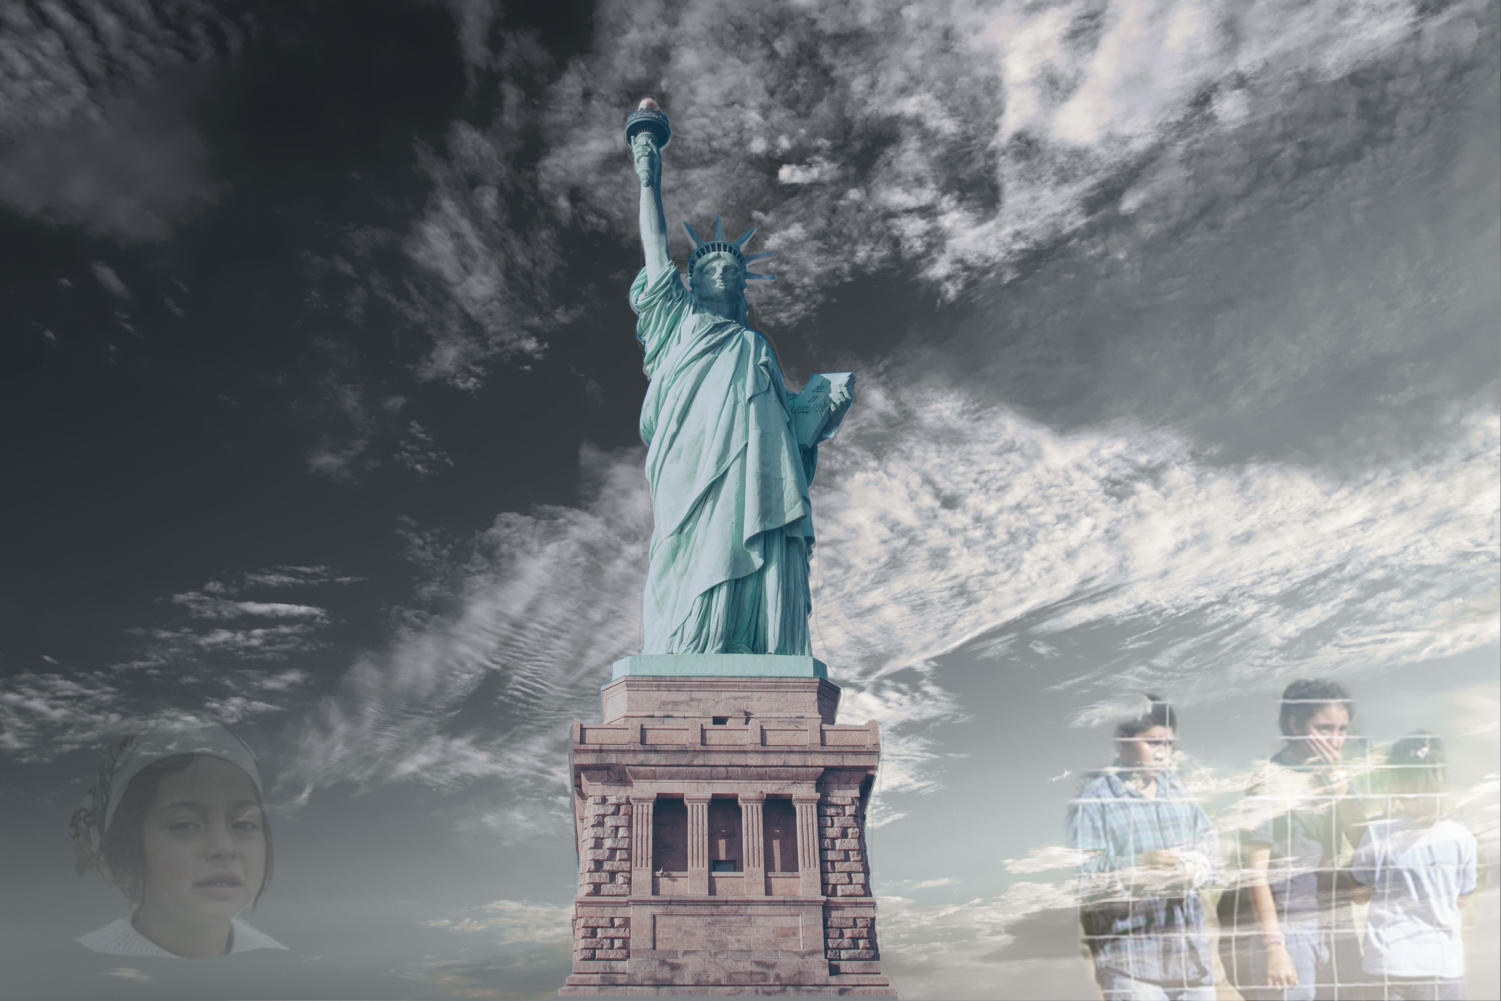 The Statue of Liberty stands tall, representing the freedom of America.